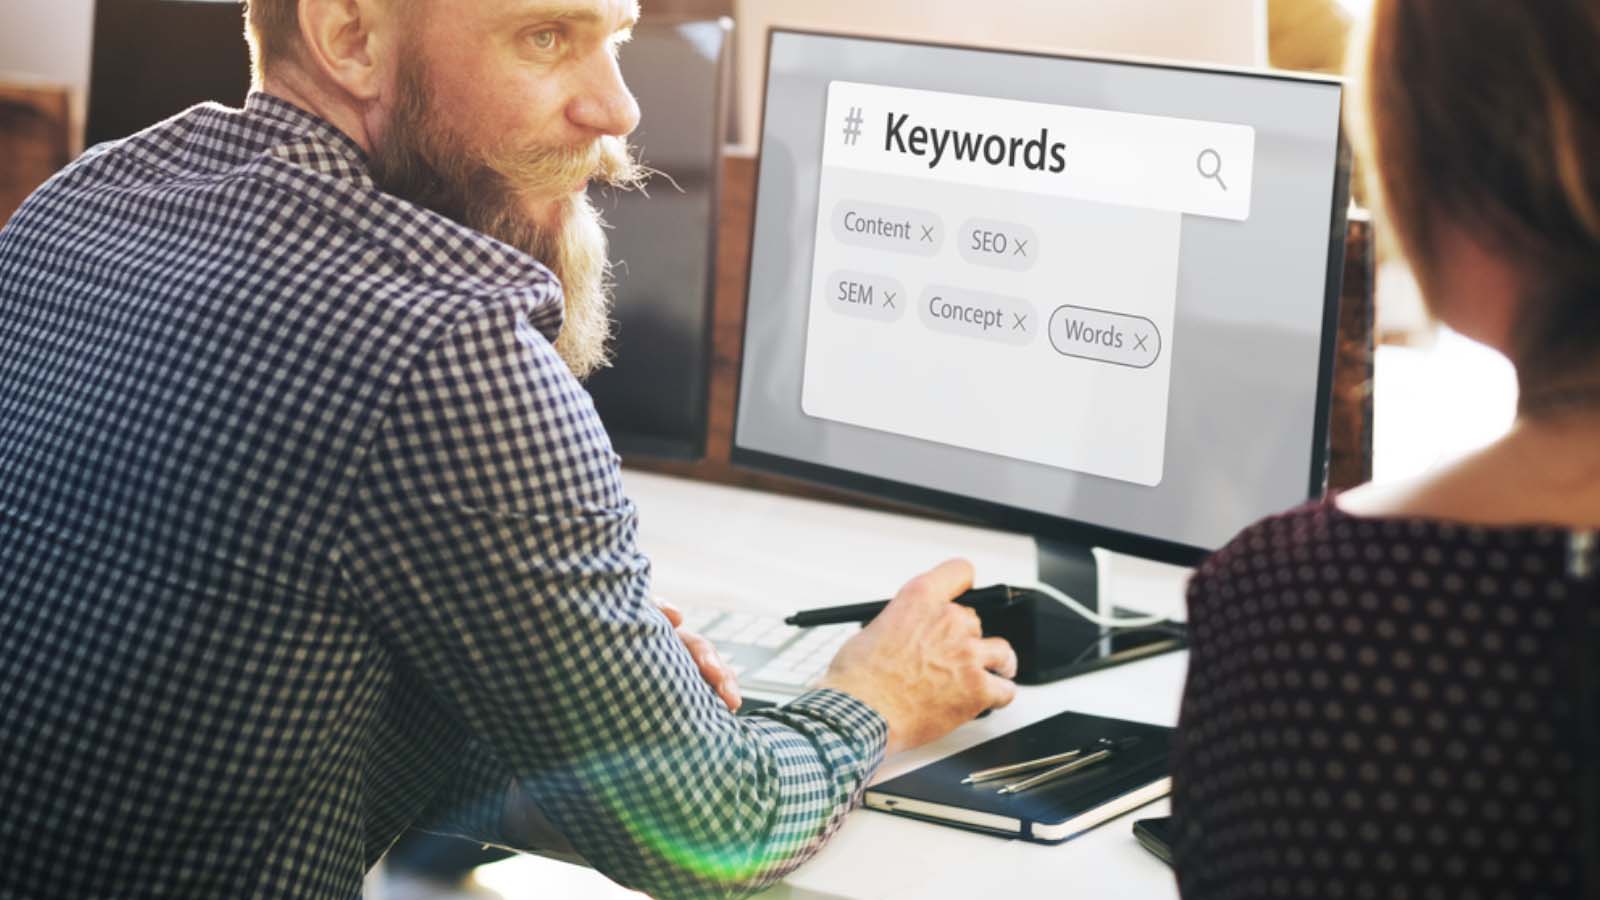 seo keywords and contents with website tags on a monitor